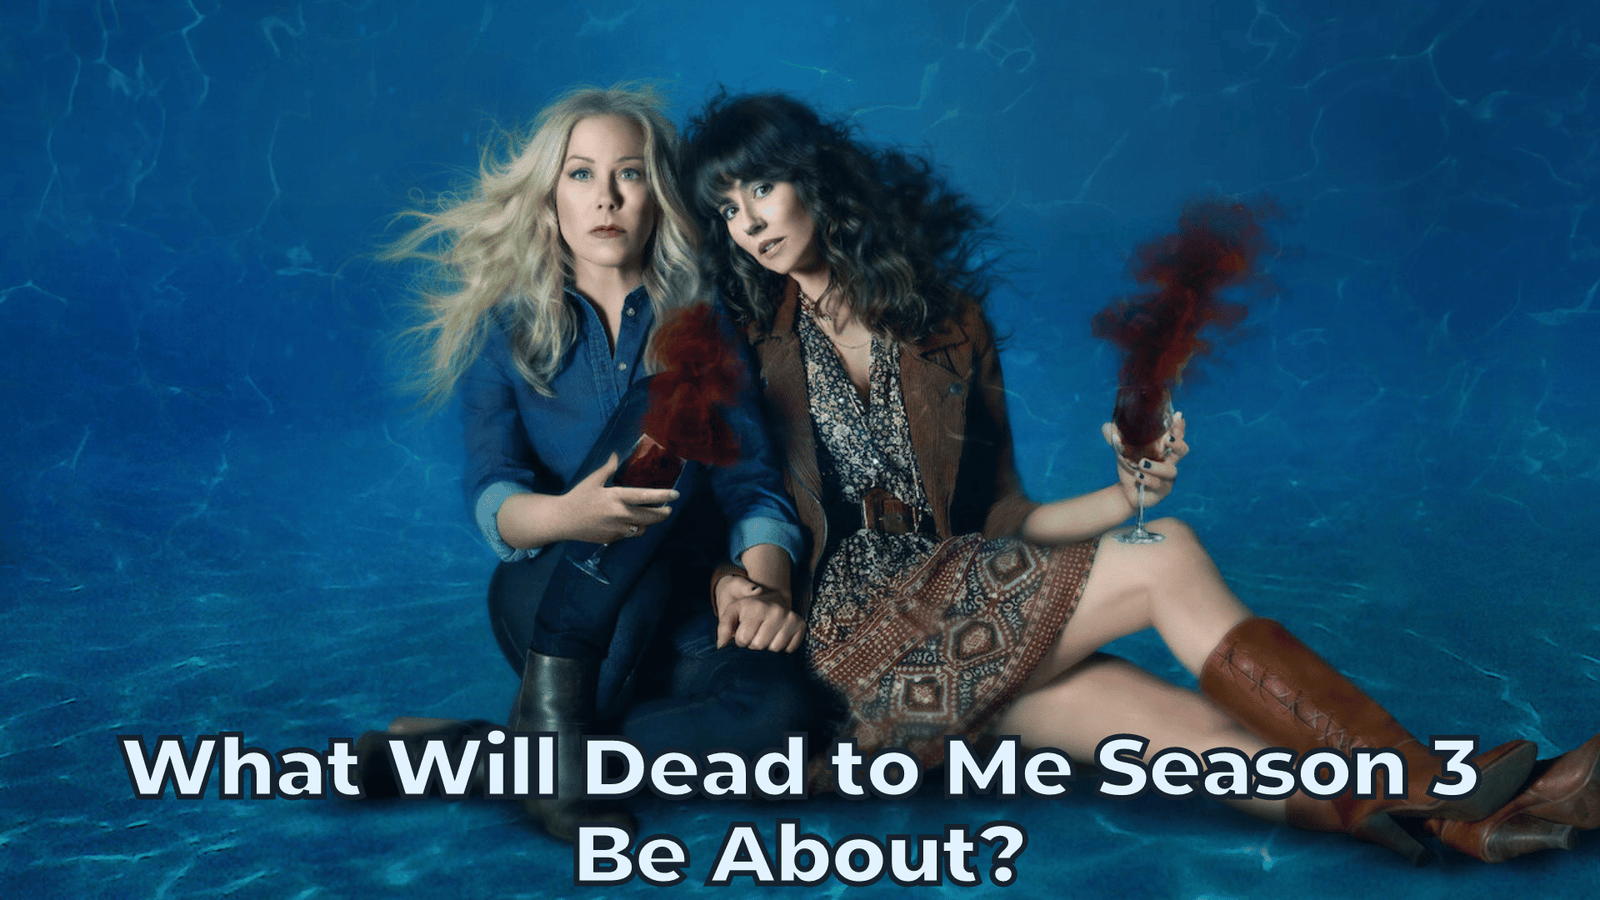 What Will Dead to Me Season 3 Be About?